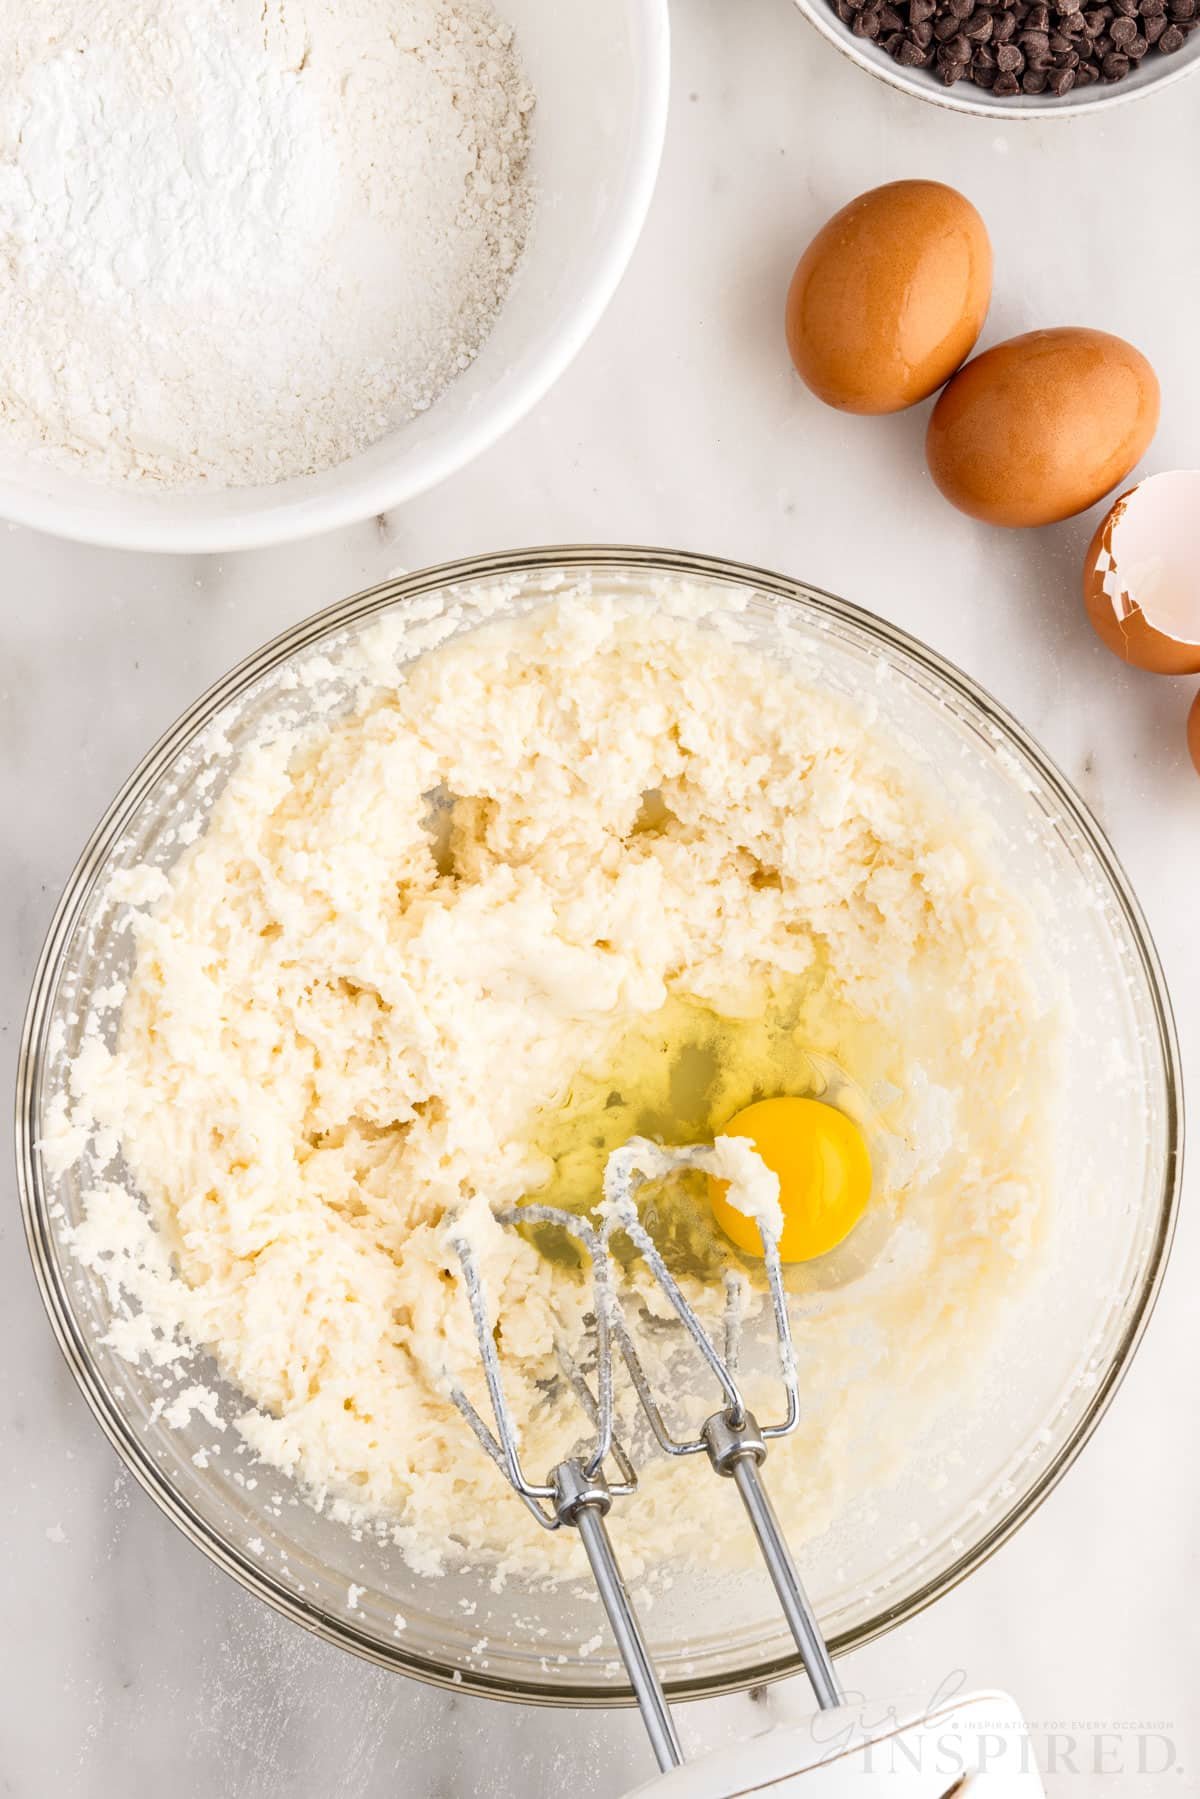 Egg added to batter next to eggs and bowl of flour with hand mixer inserted.